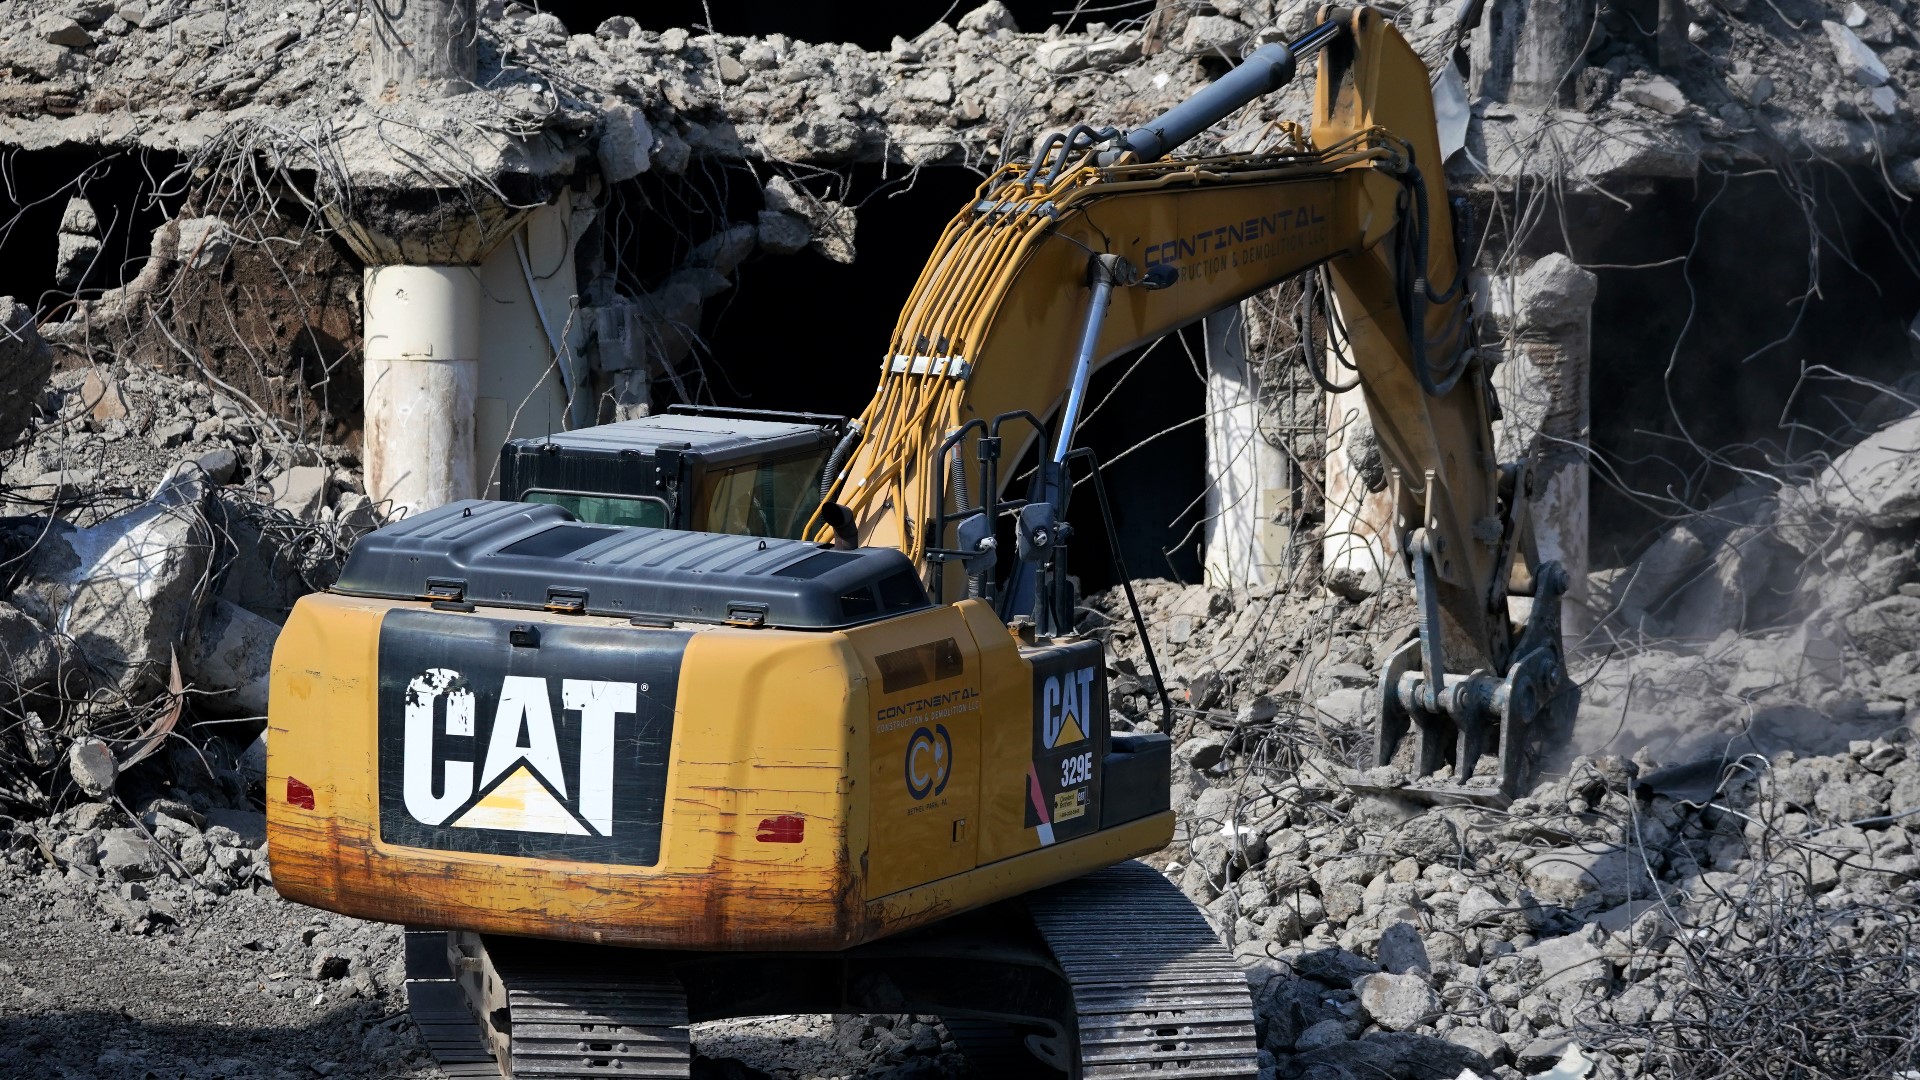 Caterpillar, which was founded in 1925, has had offices in Texas going back to the 1960s.